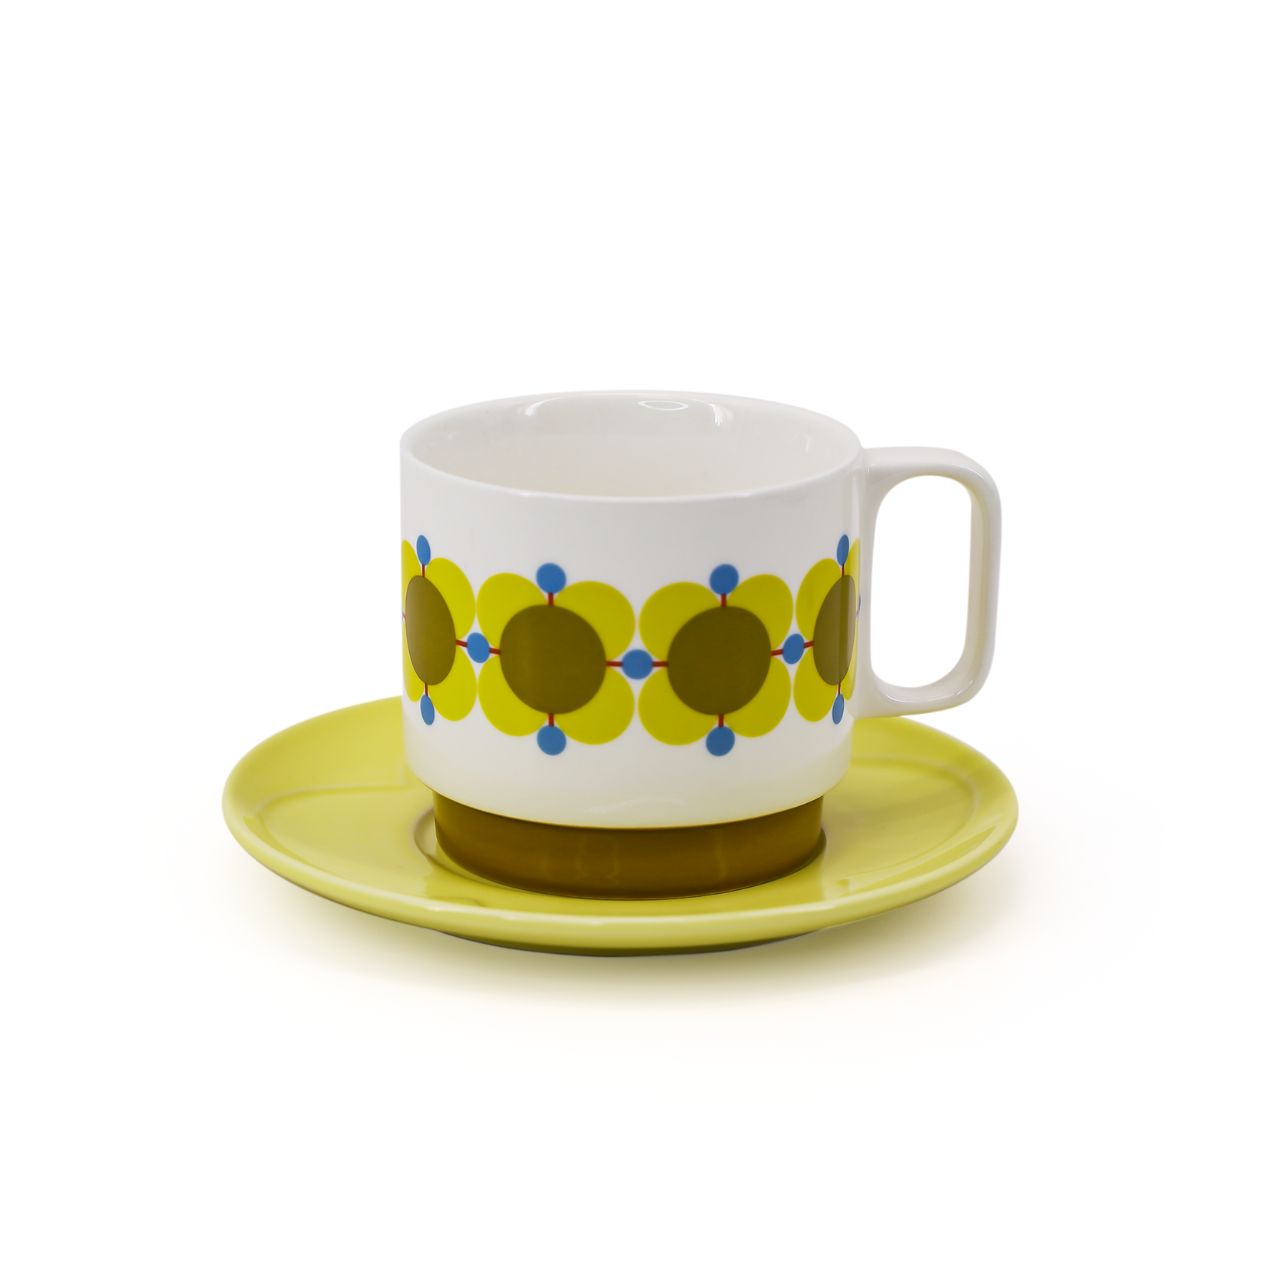 Orla Kiely Set 2 Tea Cup & Saucer - Atomic Flower  DESIGNED IN THE UK BY ORLA KIELY: This set of two tea cup and saucer has a unique 'Atomic Flower' print.  Each cup is stamped with an authentic Orla Kiely logo.